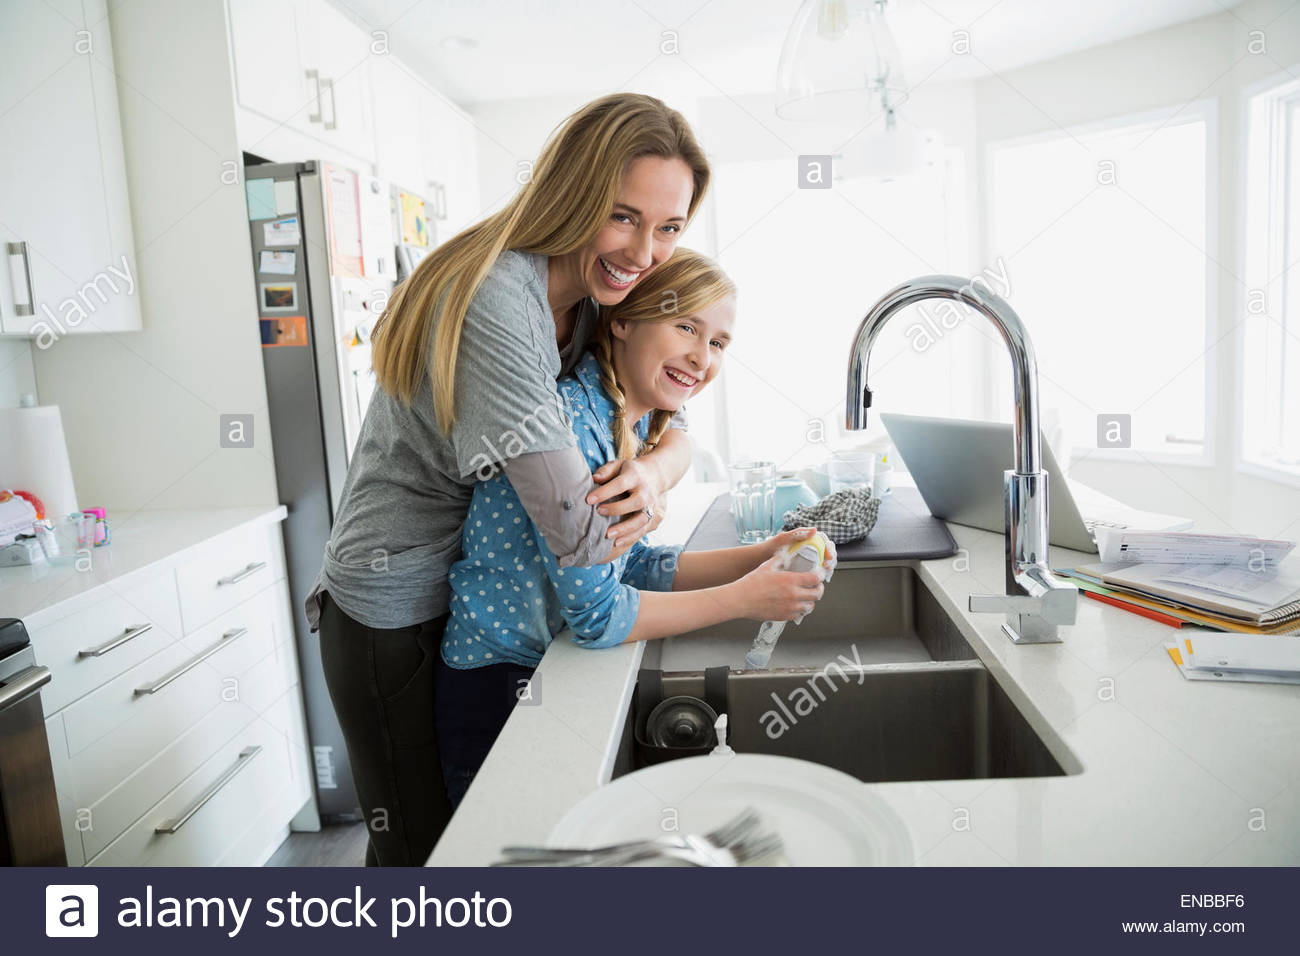 Portrait of smiling mother hugging daughter doing dishes Stock Photo